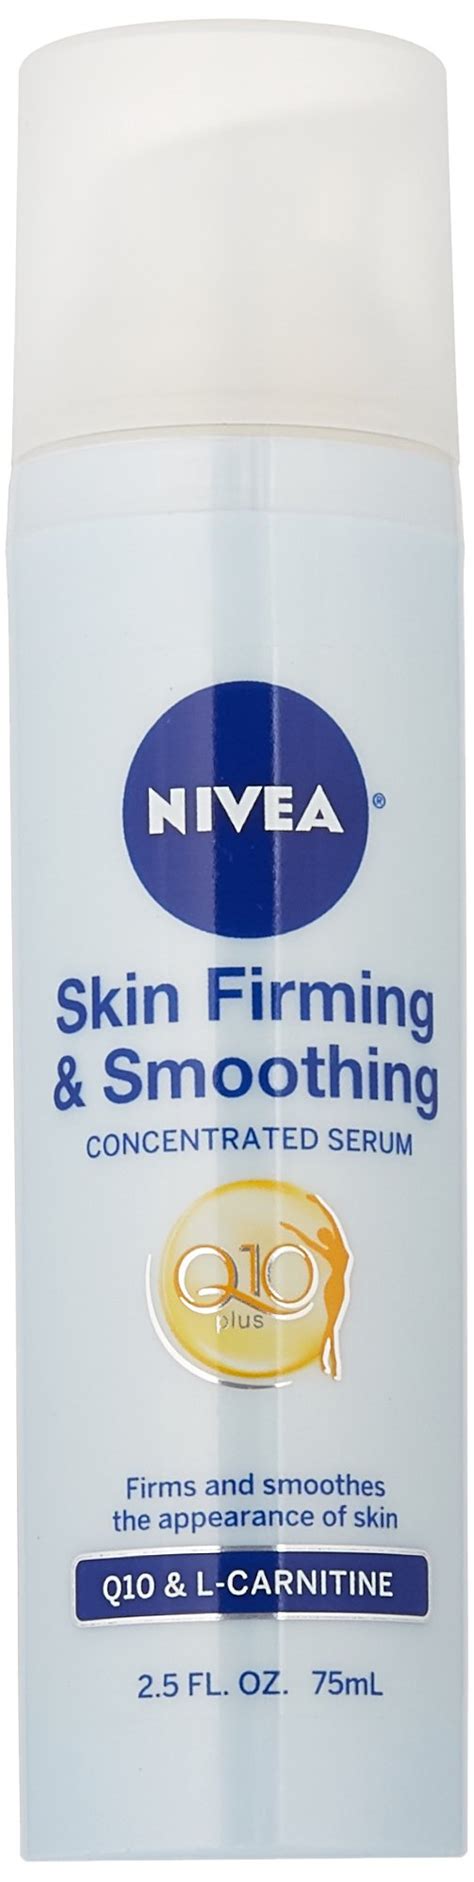 Nivea Skin Firming And Smoothing Concentrated Serum 250 Oz Single Pack